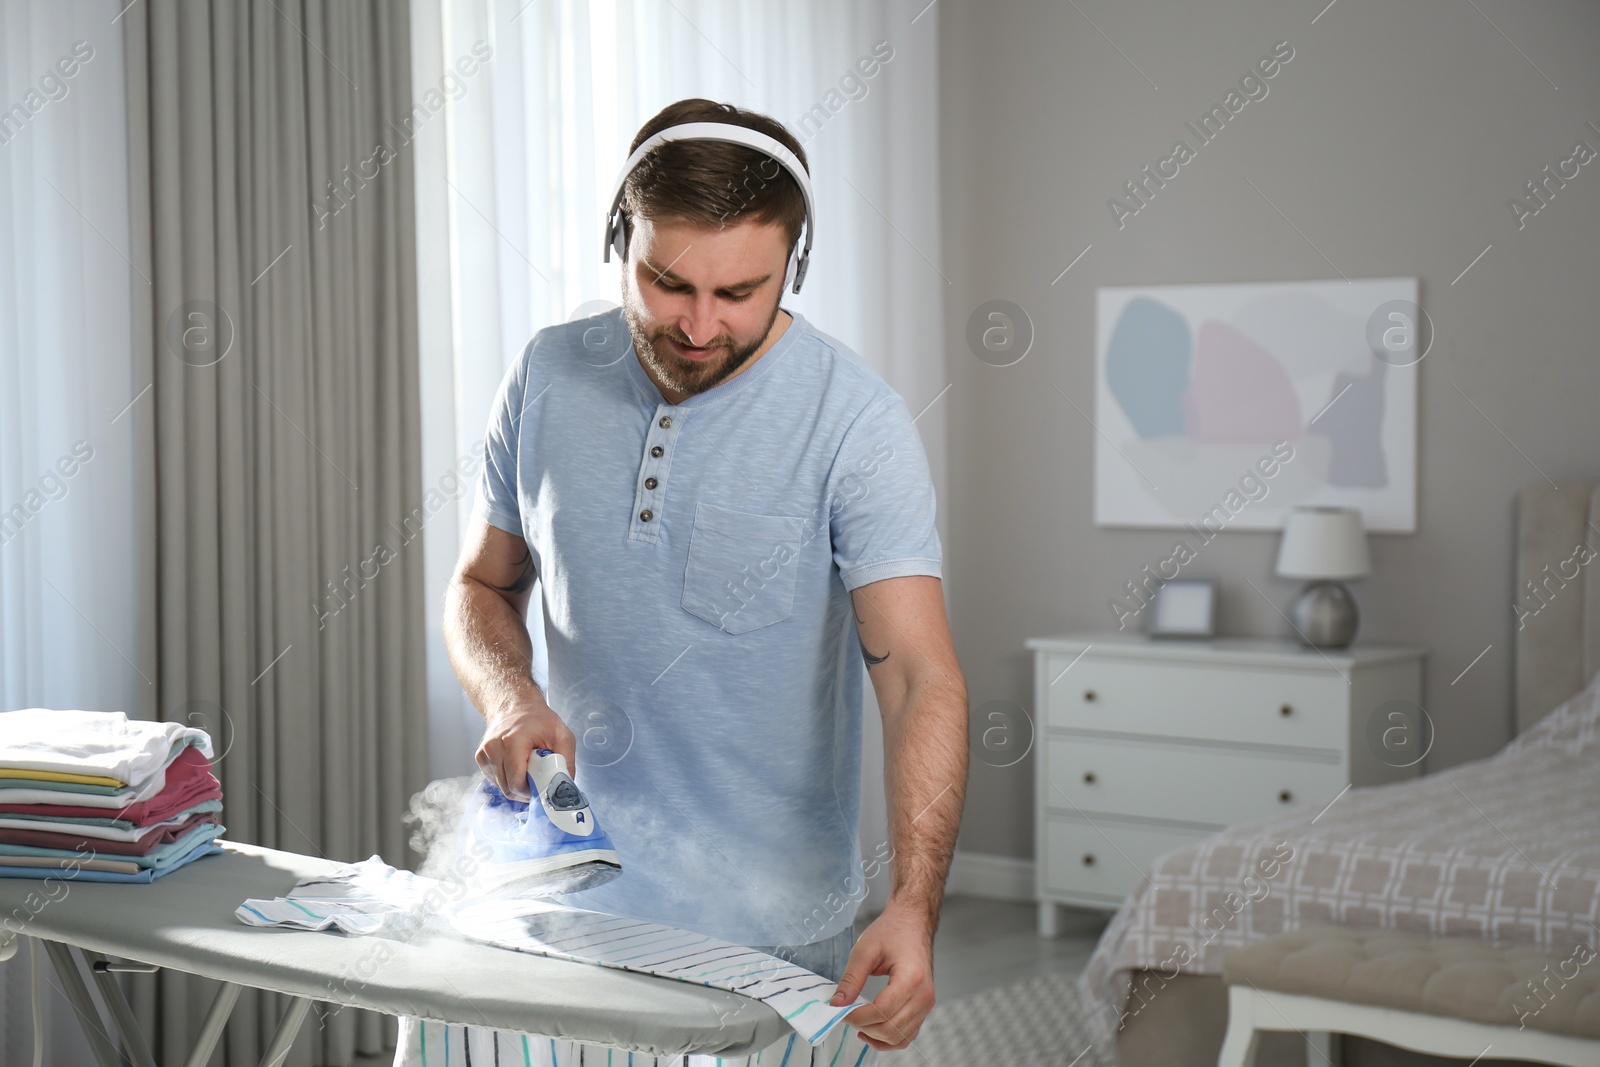 Photo of Man listening to music while ironing at home